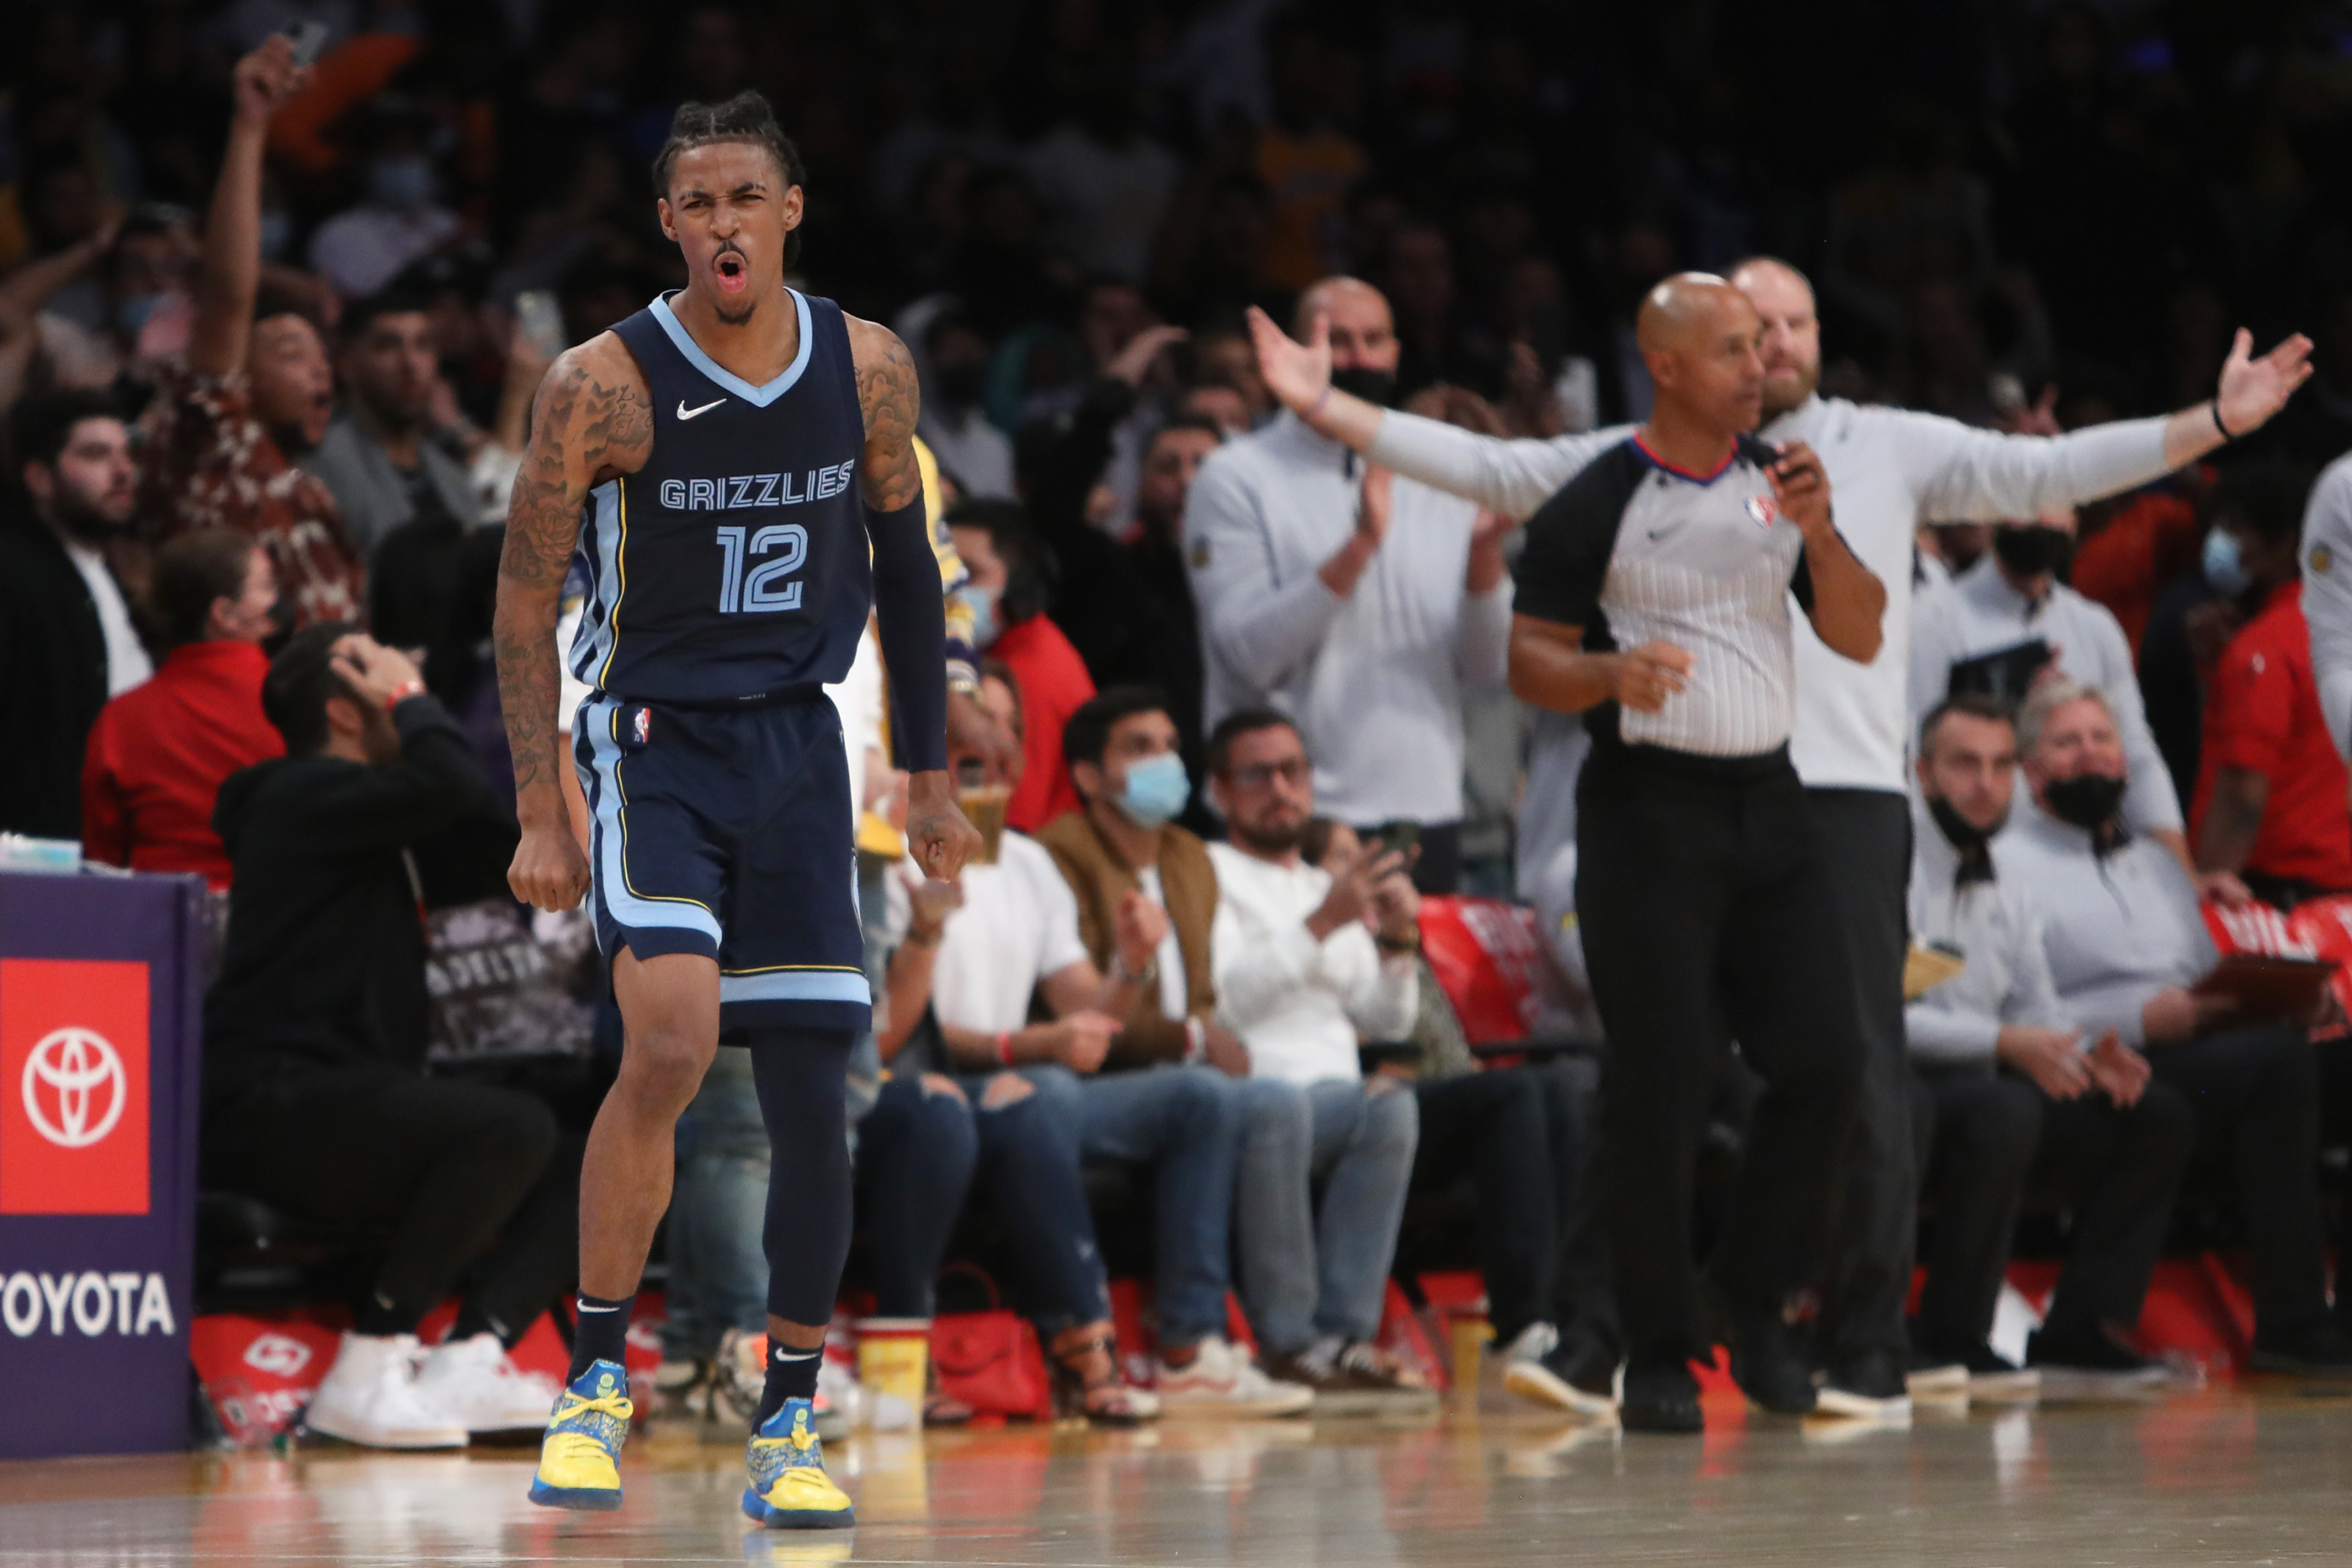 Ja Morant is simply incredible, he has the Top 5 highest scores in Grizzlies'  history